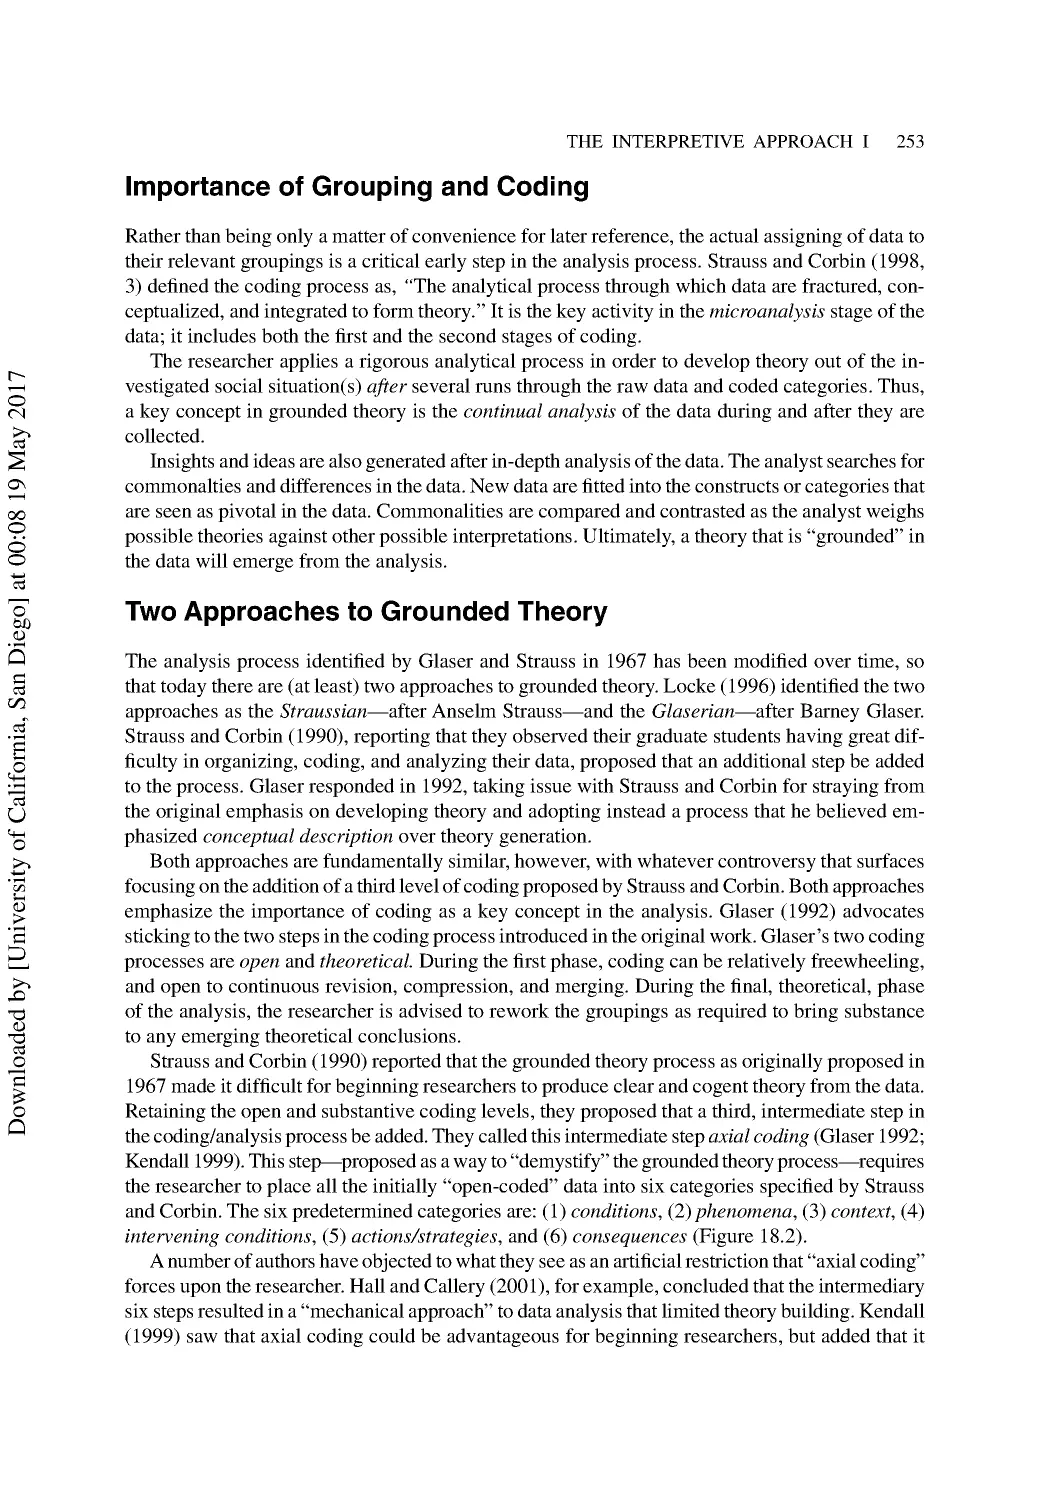 Importance of Grouping and Coding
Two Approaches to Grounded Theory